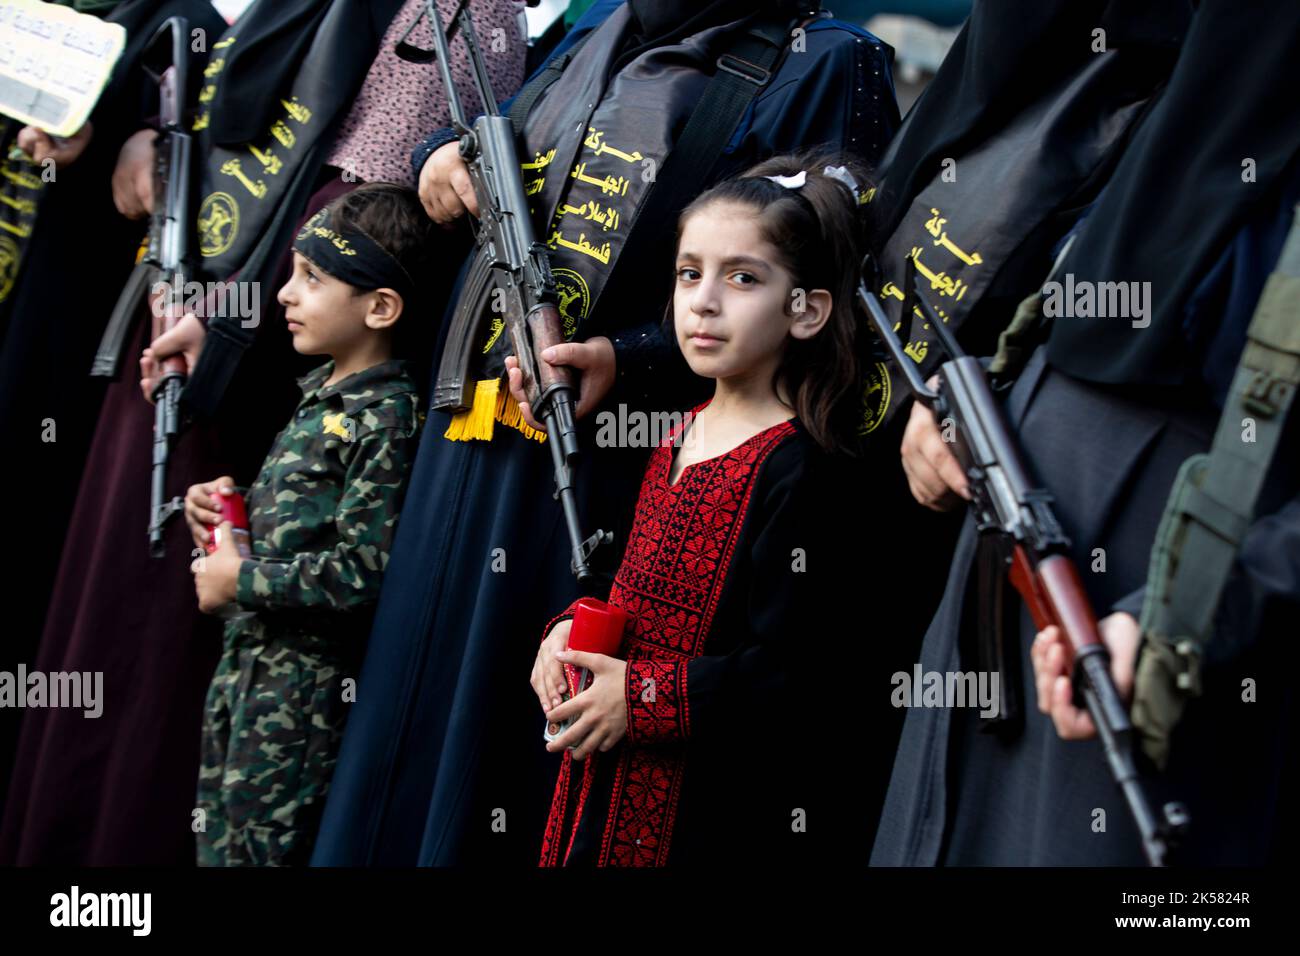 Palestinian Territories, Gaza Strip. October 06th 2022. Armed fighters from Al-Quds Brigades, the military wing of Islamic Jihad, participate in an anti-Israel military parade on the 35th anniversary of the launch of the Islamic Jihad movement in Khan Yunis, southern Gaza. Stock Photo